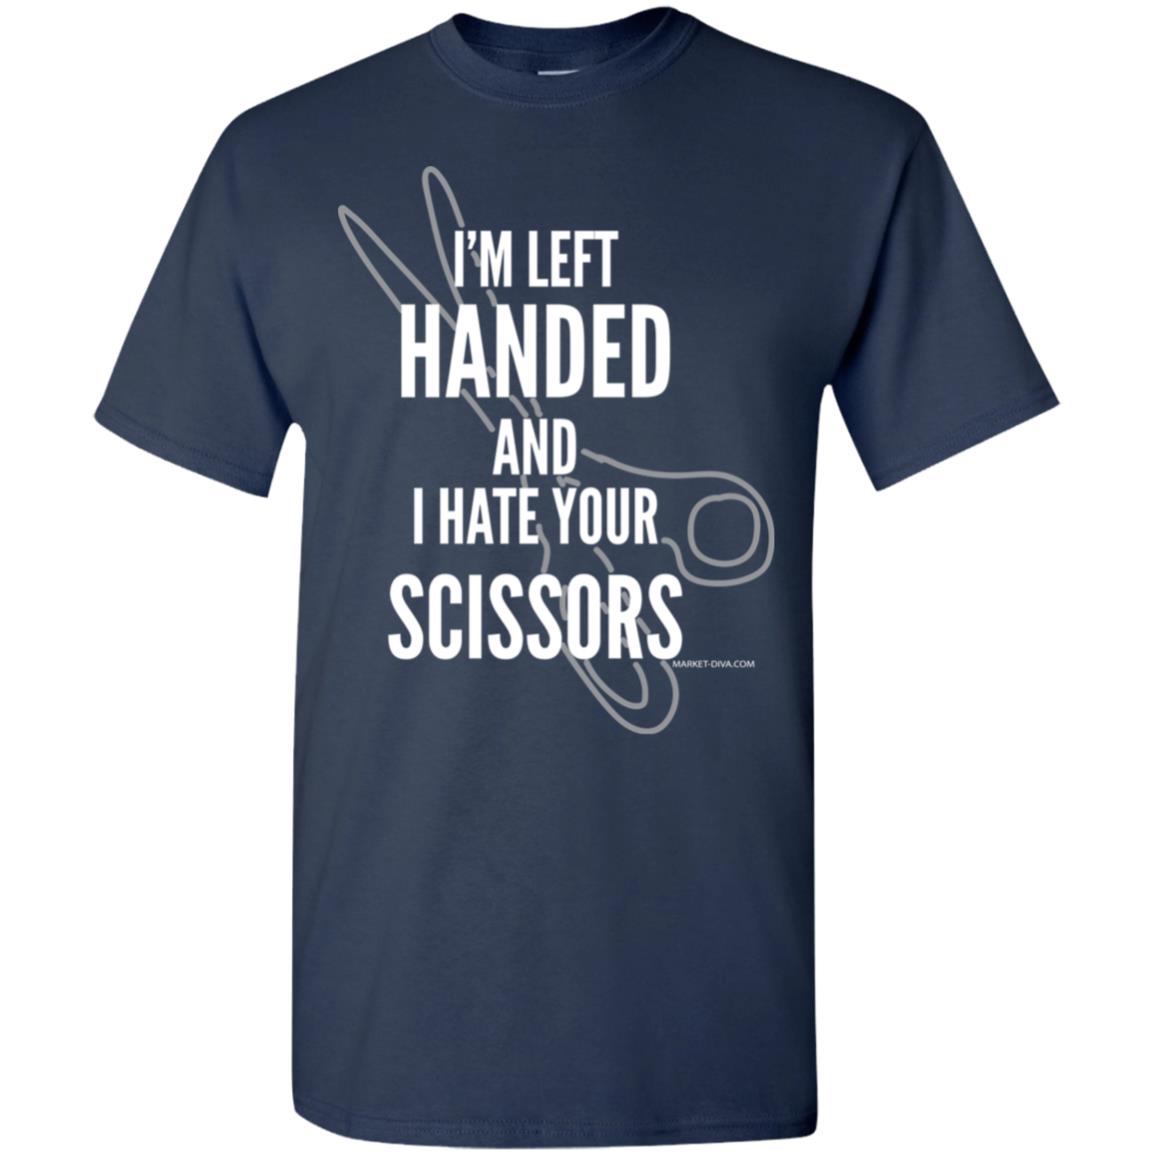 Left Handed and I Hate Your Scissors